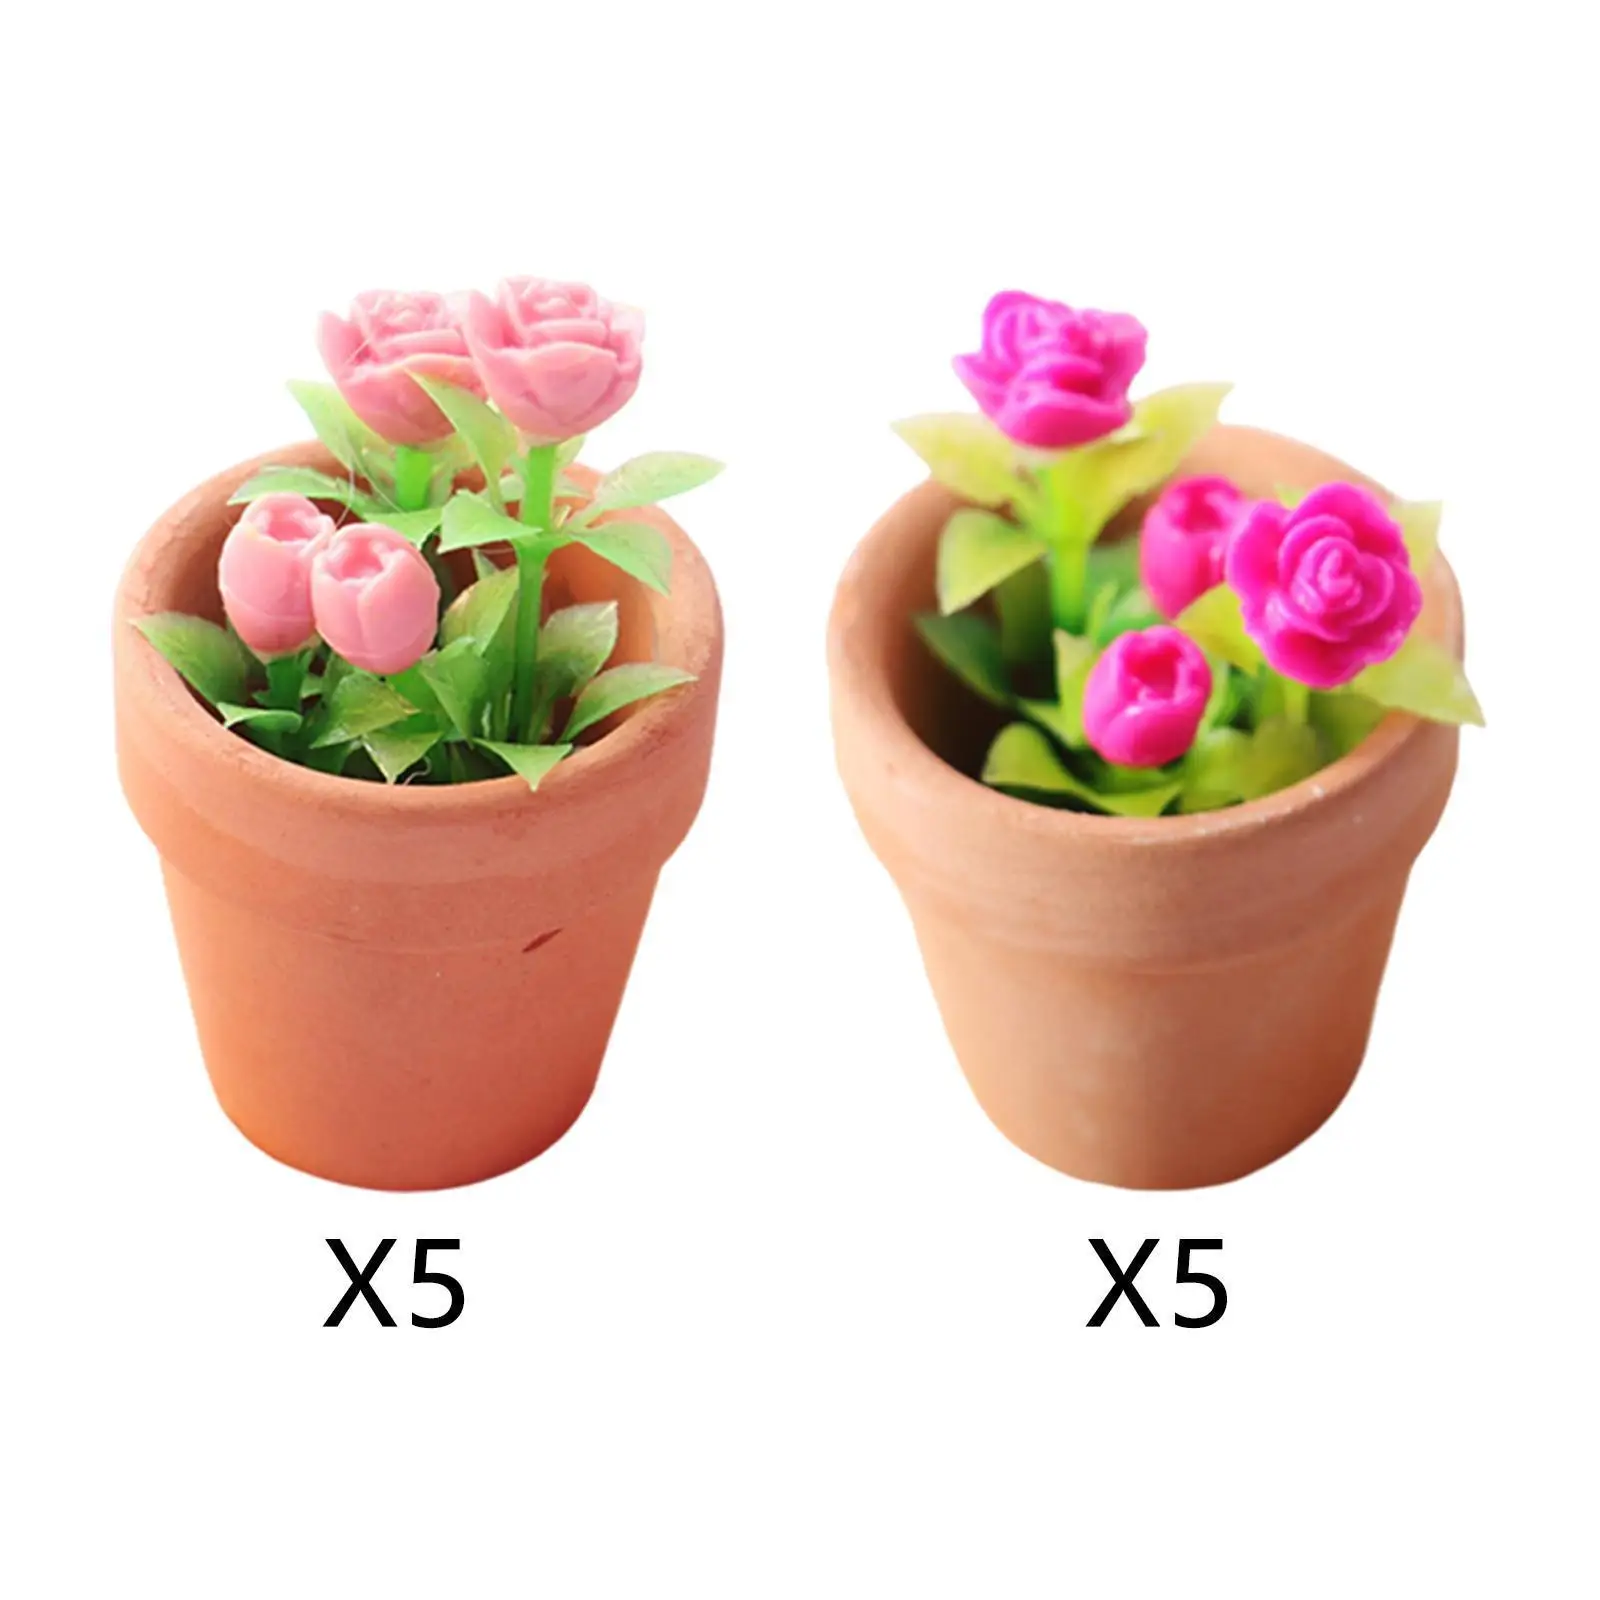 Mini Rose Potted Plants 1:12 Dollhouse Birthday Gifts Plant Potted for Kids Children